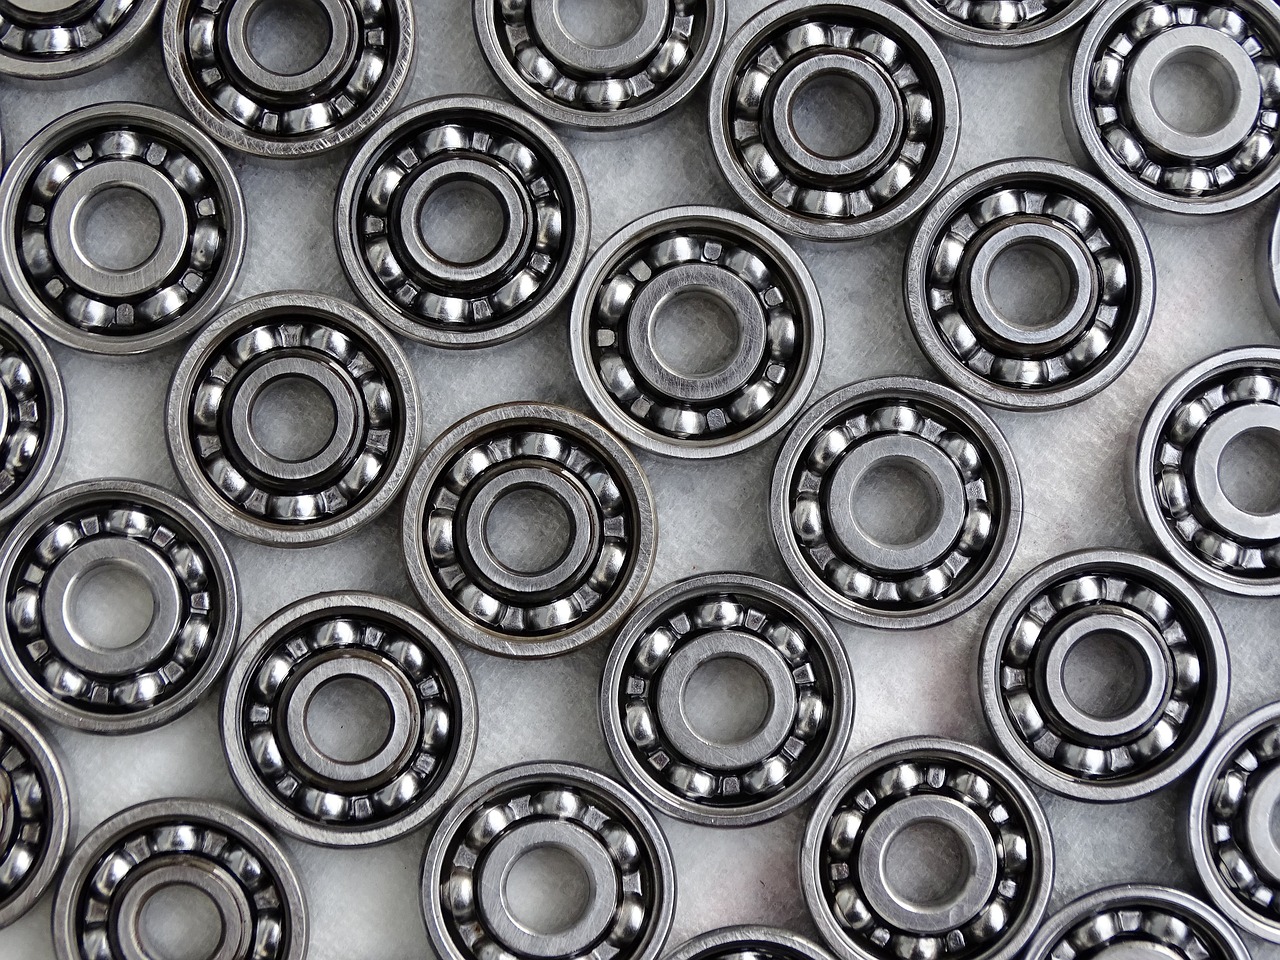 What Are The Advantages Of Cylindrical Roller Bearing?